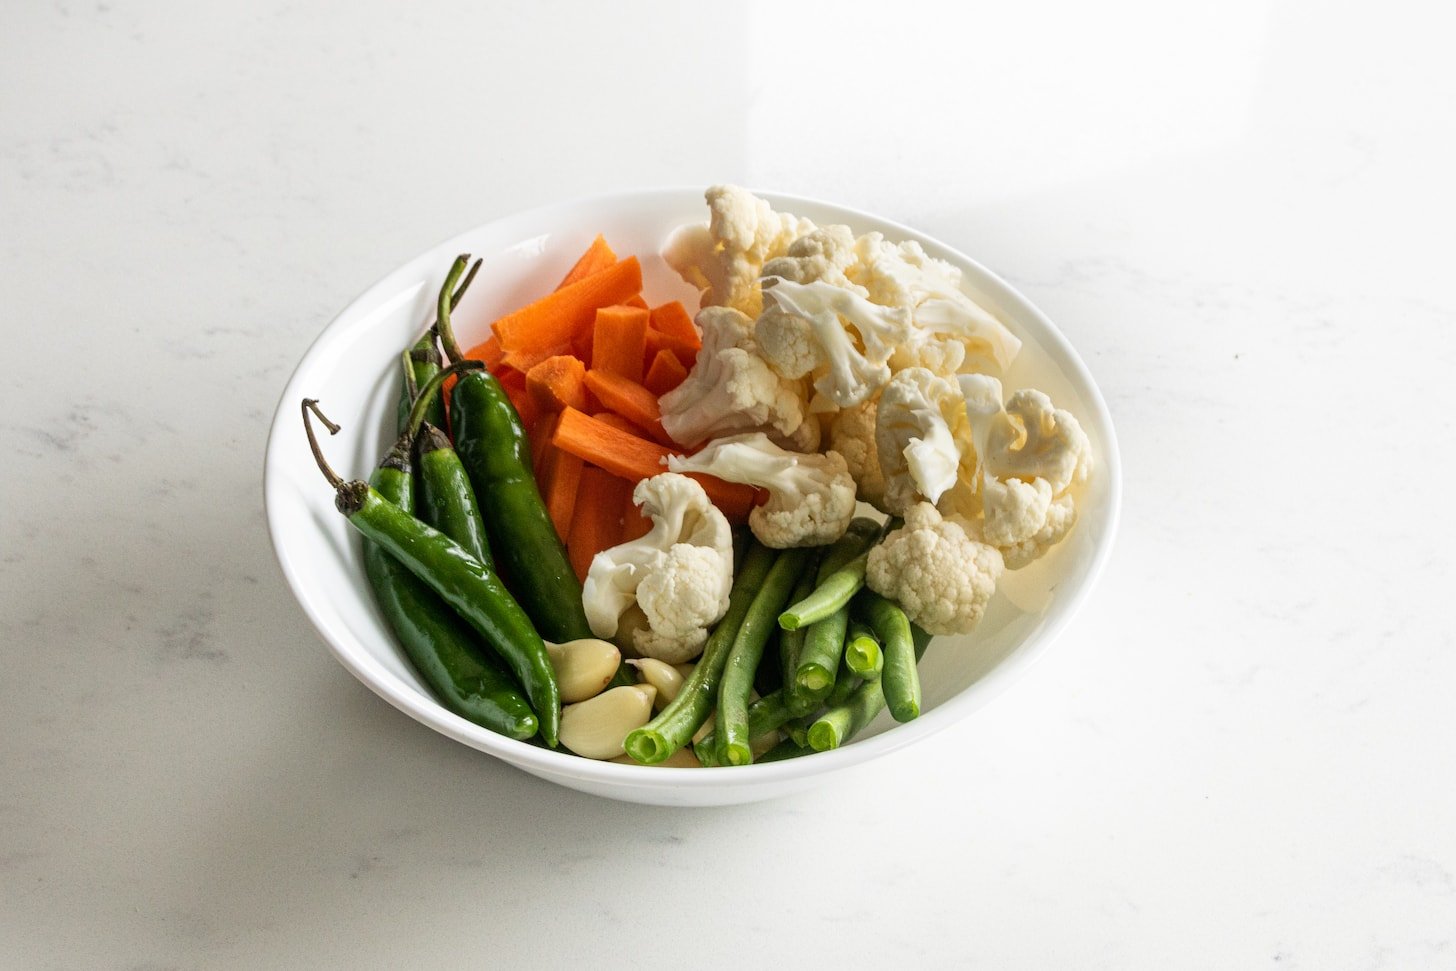 a white bowl of chopped vegetables: carrots, cauliflower, chillies, beans and garlic cloves.